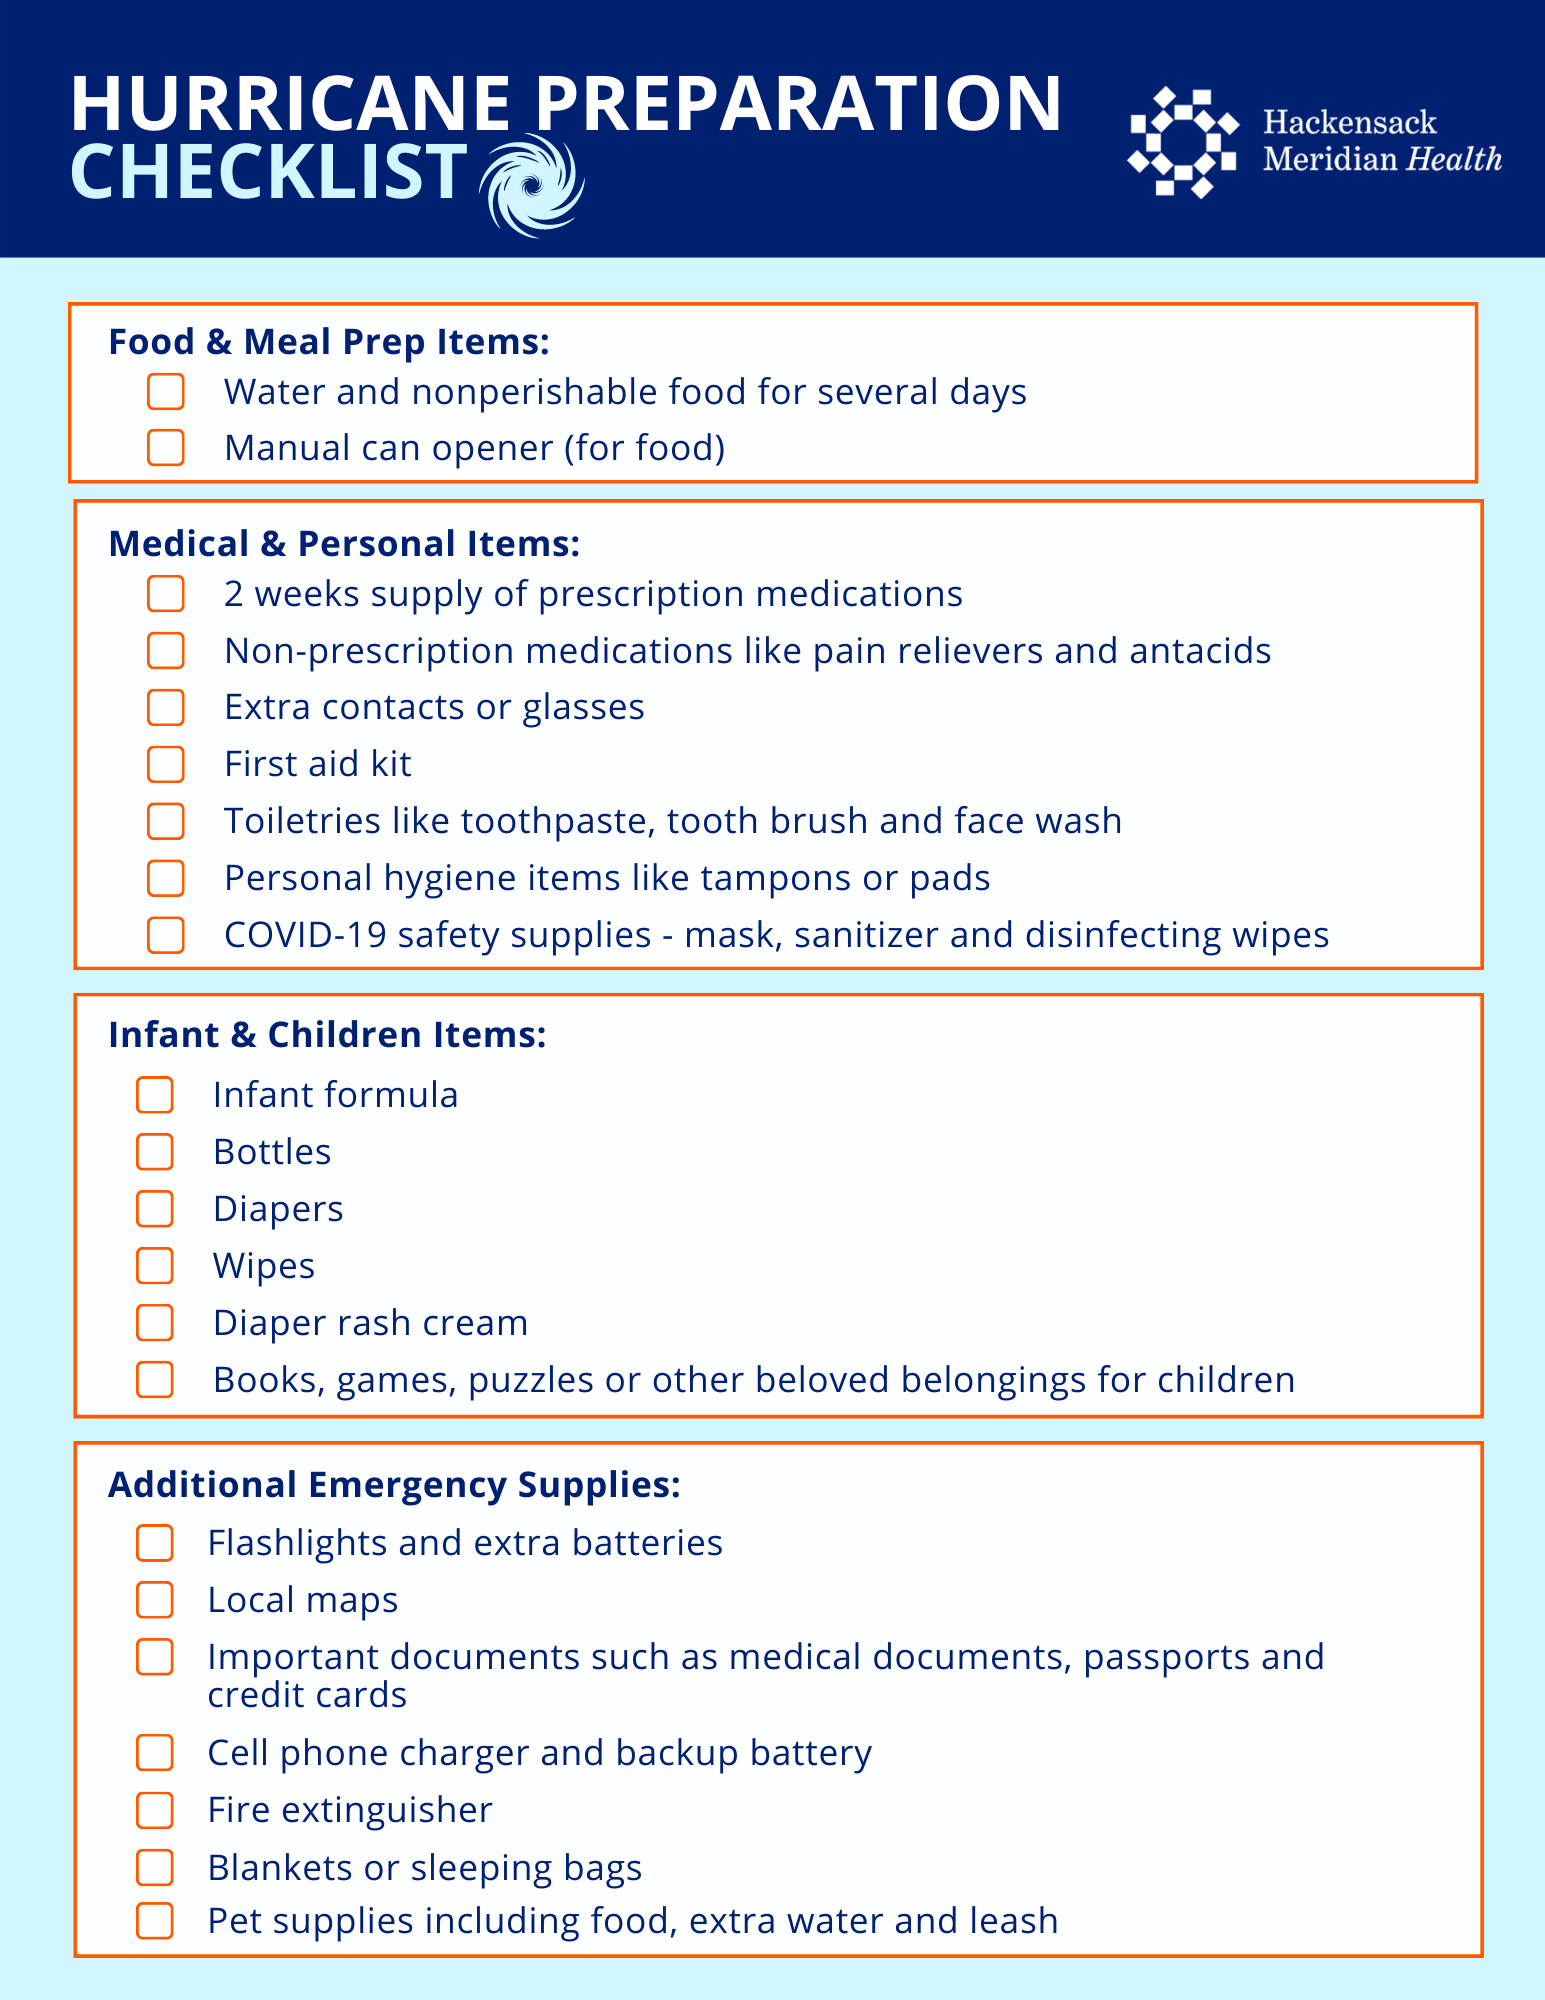 Hurricane Preparation Checklist, including food items, medical & personal items, infant & children items, and additional emergency supplies.